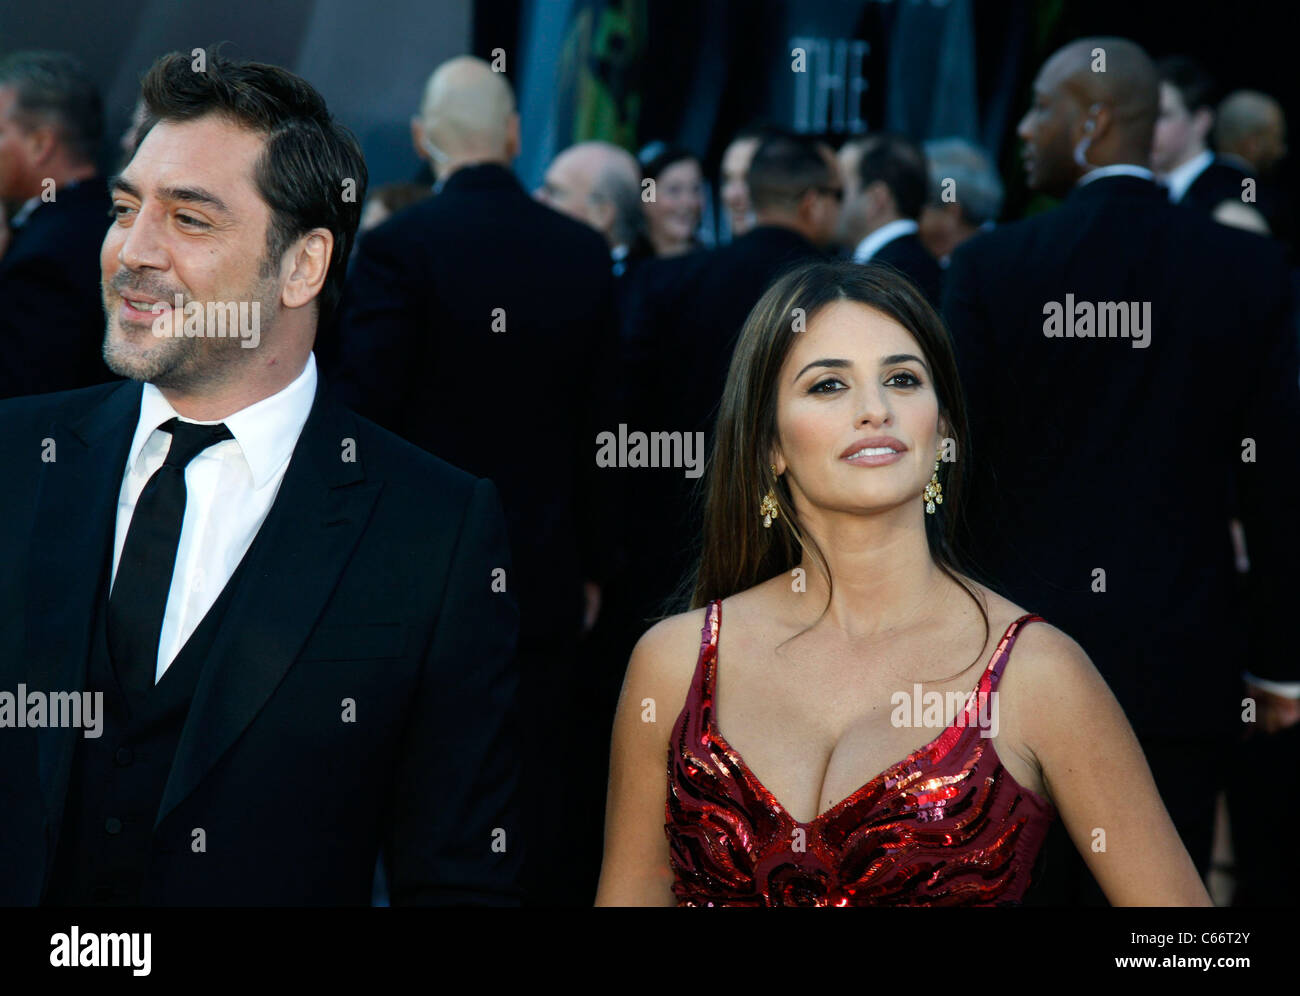 Javier Bardem, Penelope Cruz at arrivals for The 83rd Academy Awards Oscars - Arrivals Part 1, The Kodak Theatre, Los Angeles, CA February 27, 2011. Photo By: Jef Hernandez/Everett Collection Stock Photo